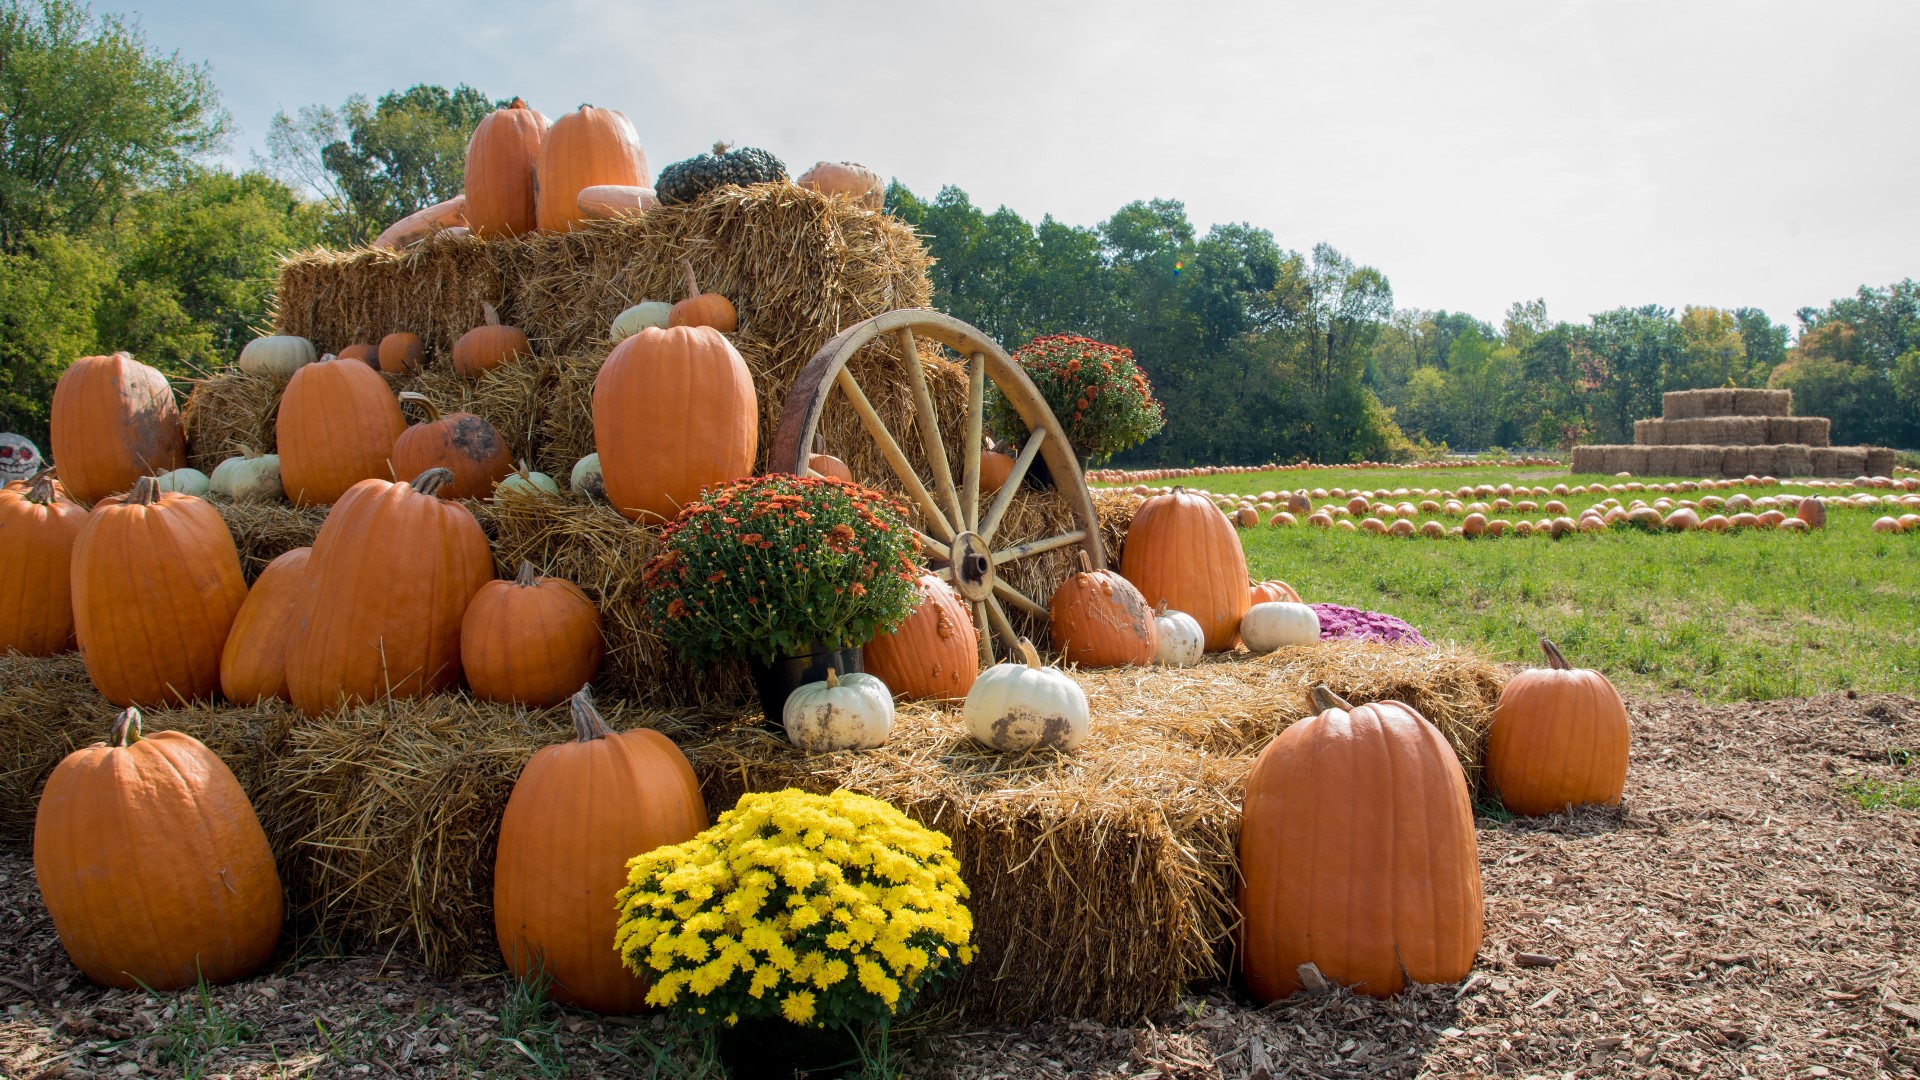 Fall officially begins on Saturday, Sept. 23, and if you're more than ready for all the autumn activities, we have a list of places you can visit to enjoy the season